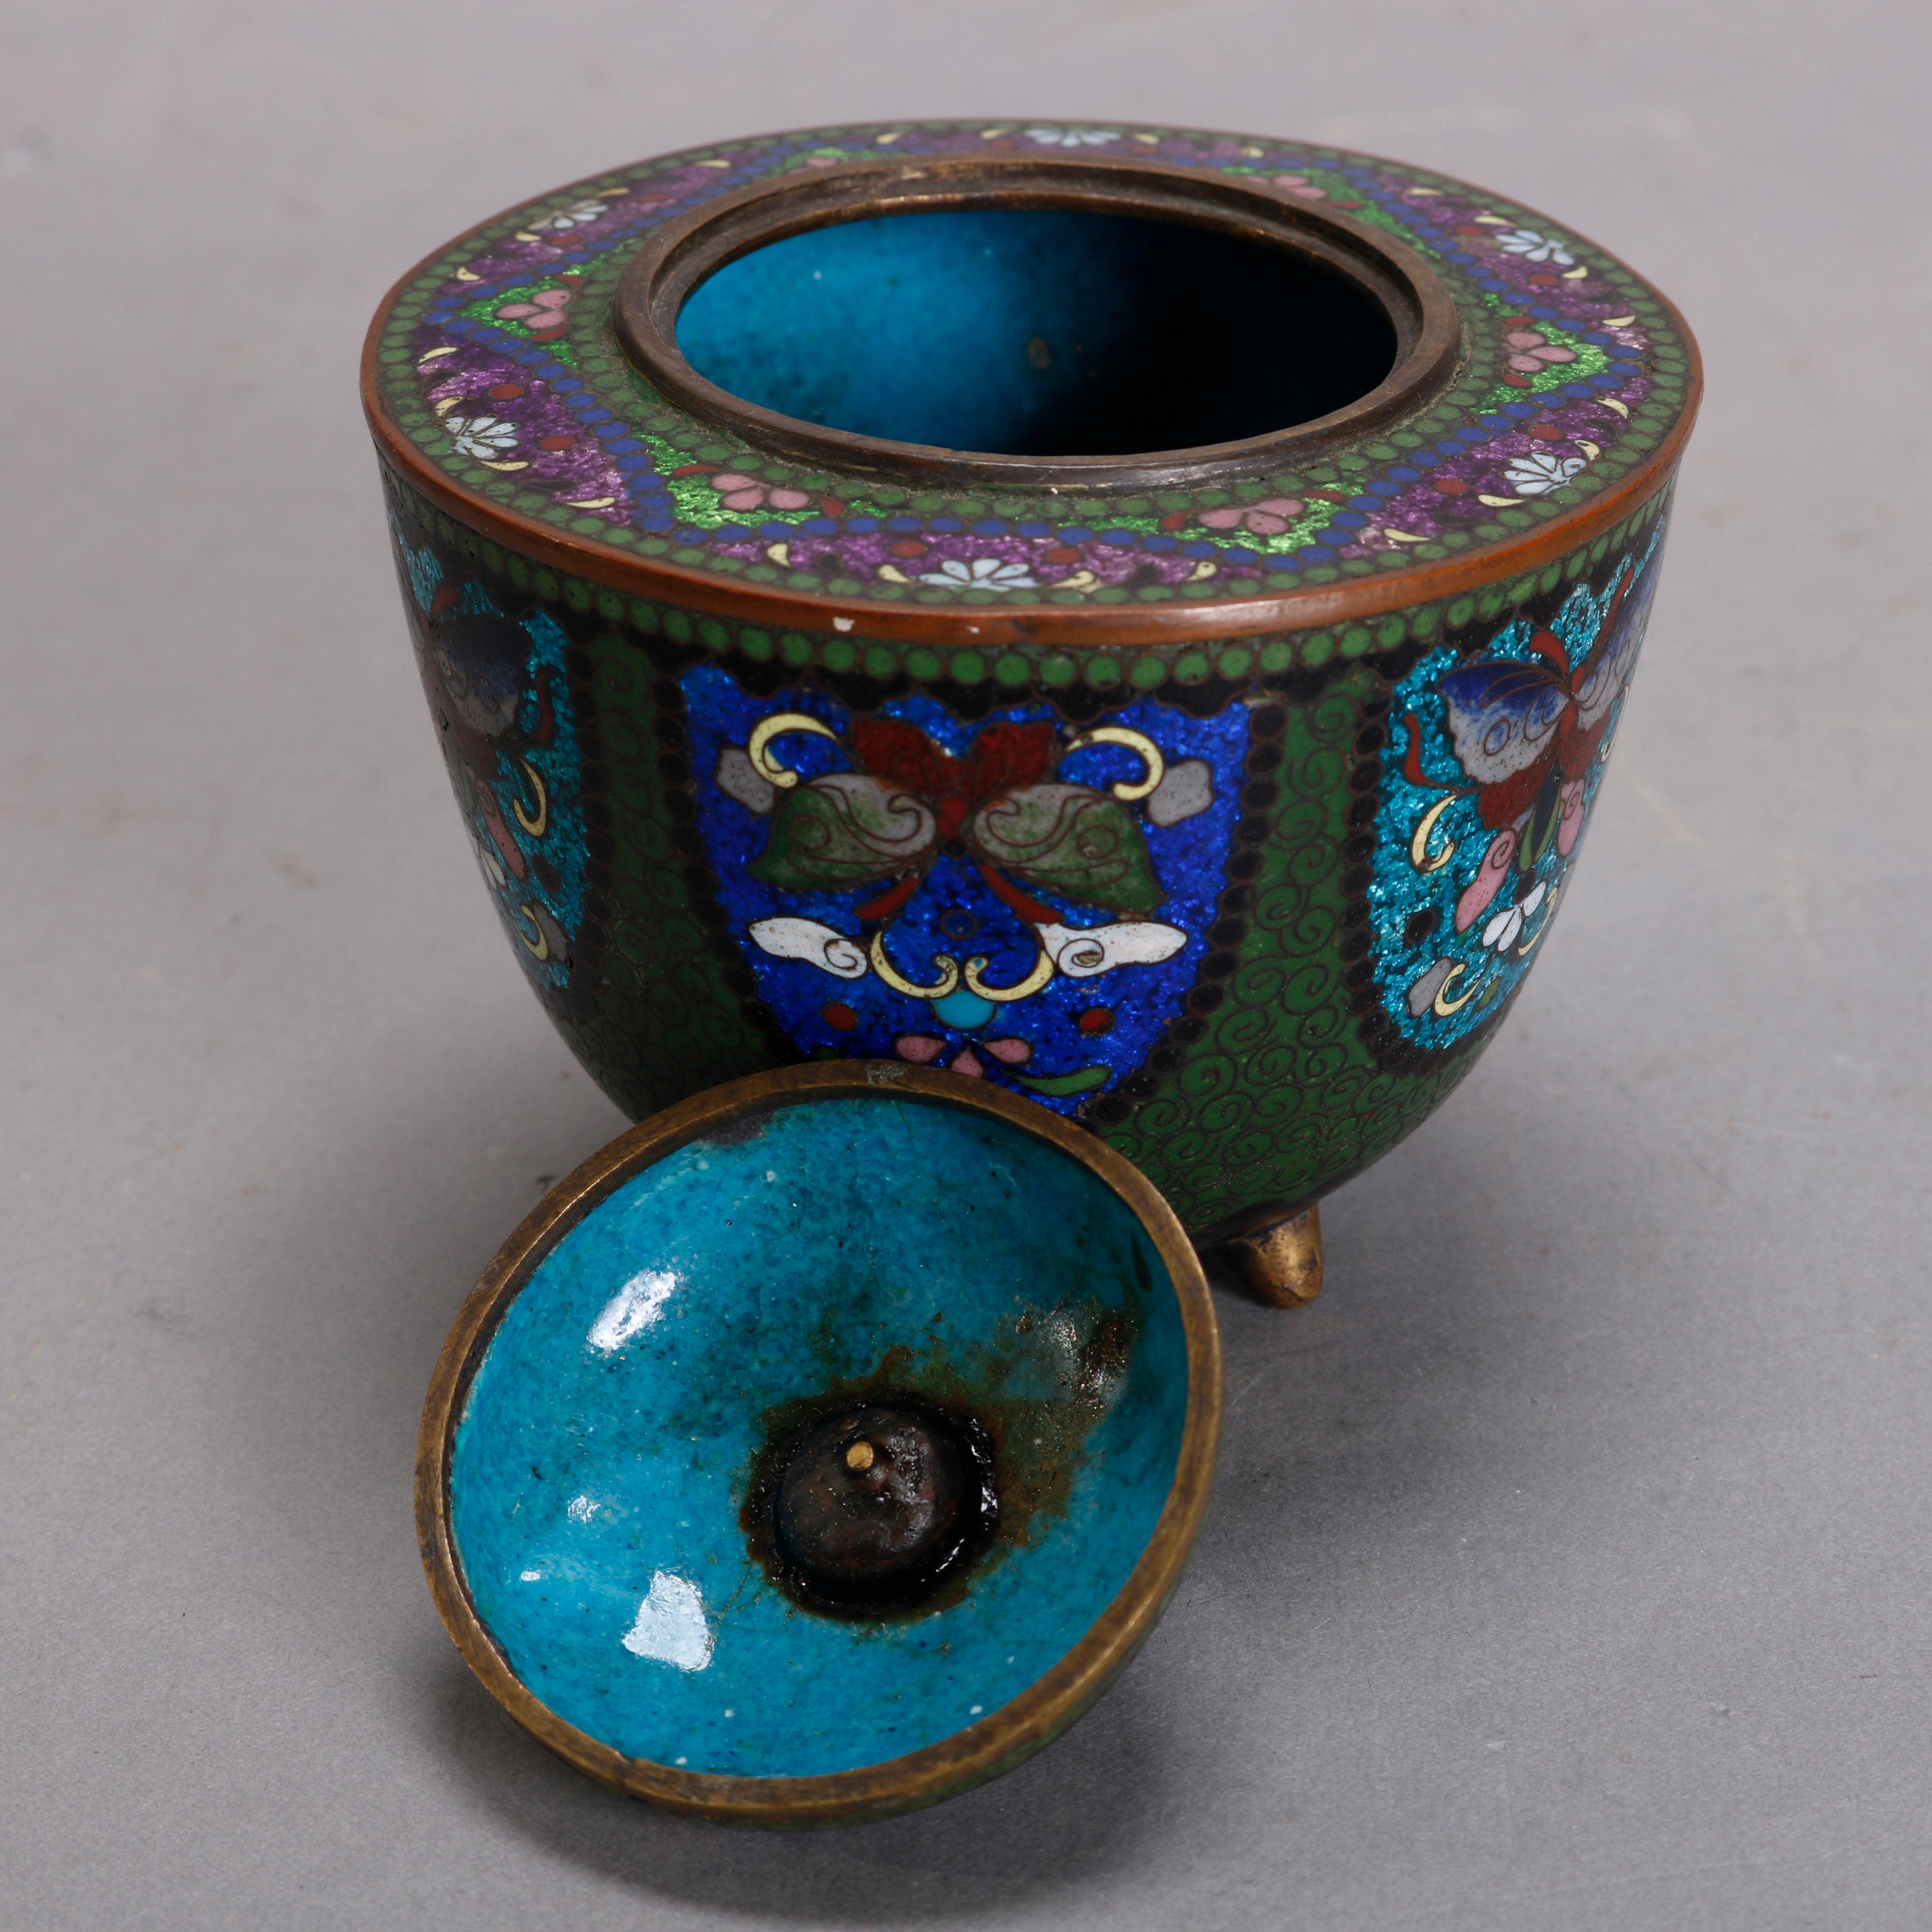 Bronze Antique Chinese Butterfly Cloisonne Enameled Lidded Server, circa 1900